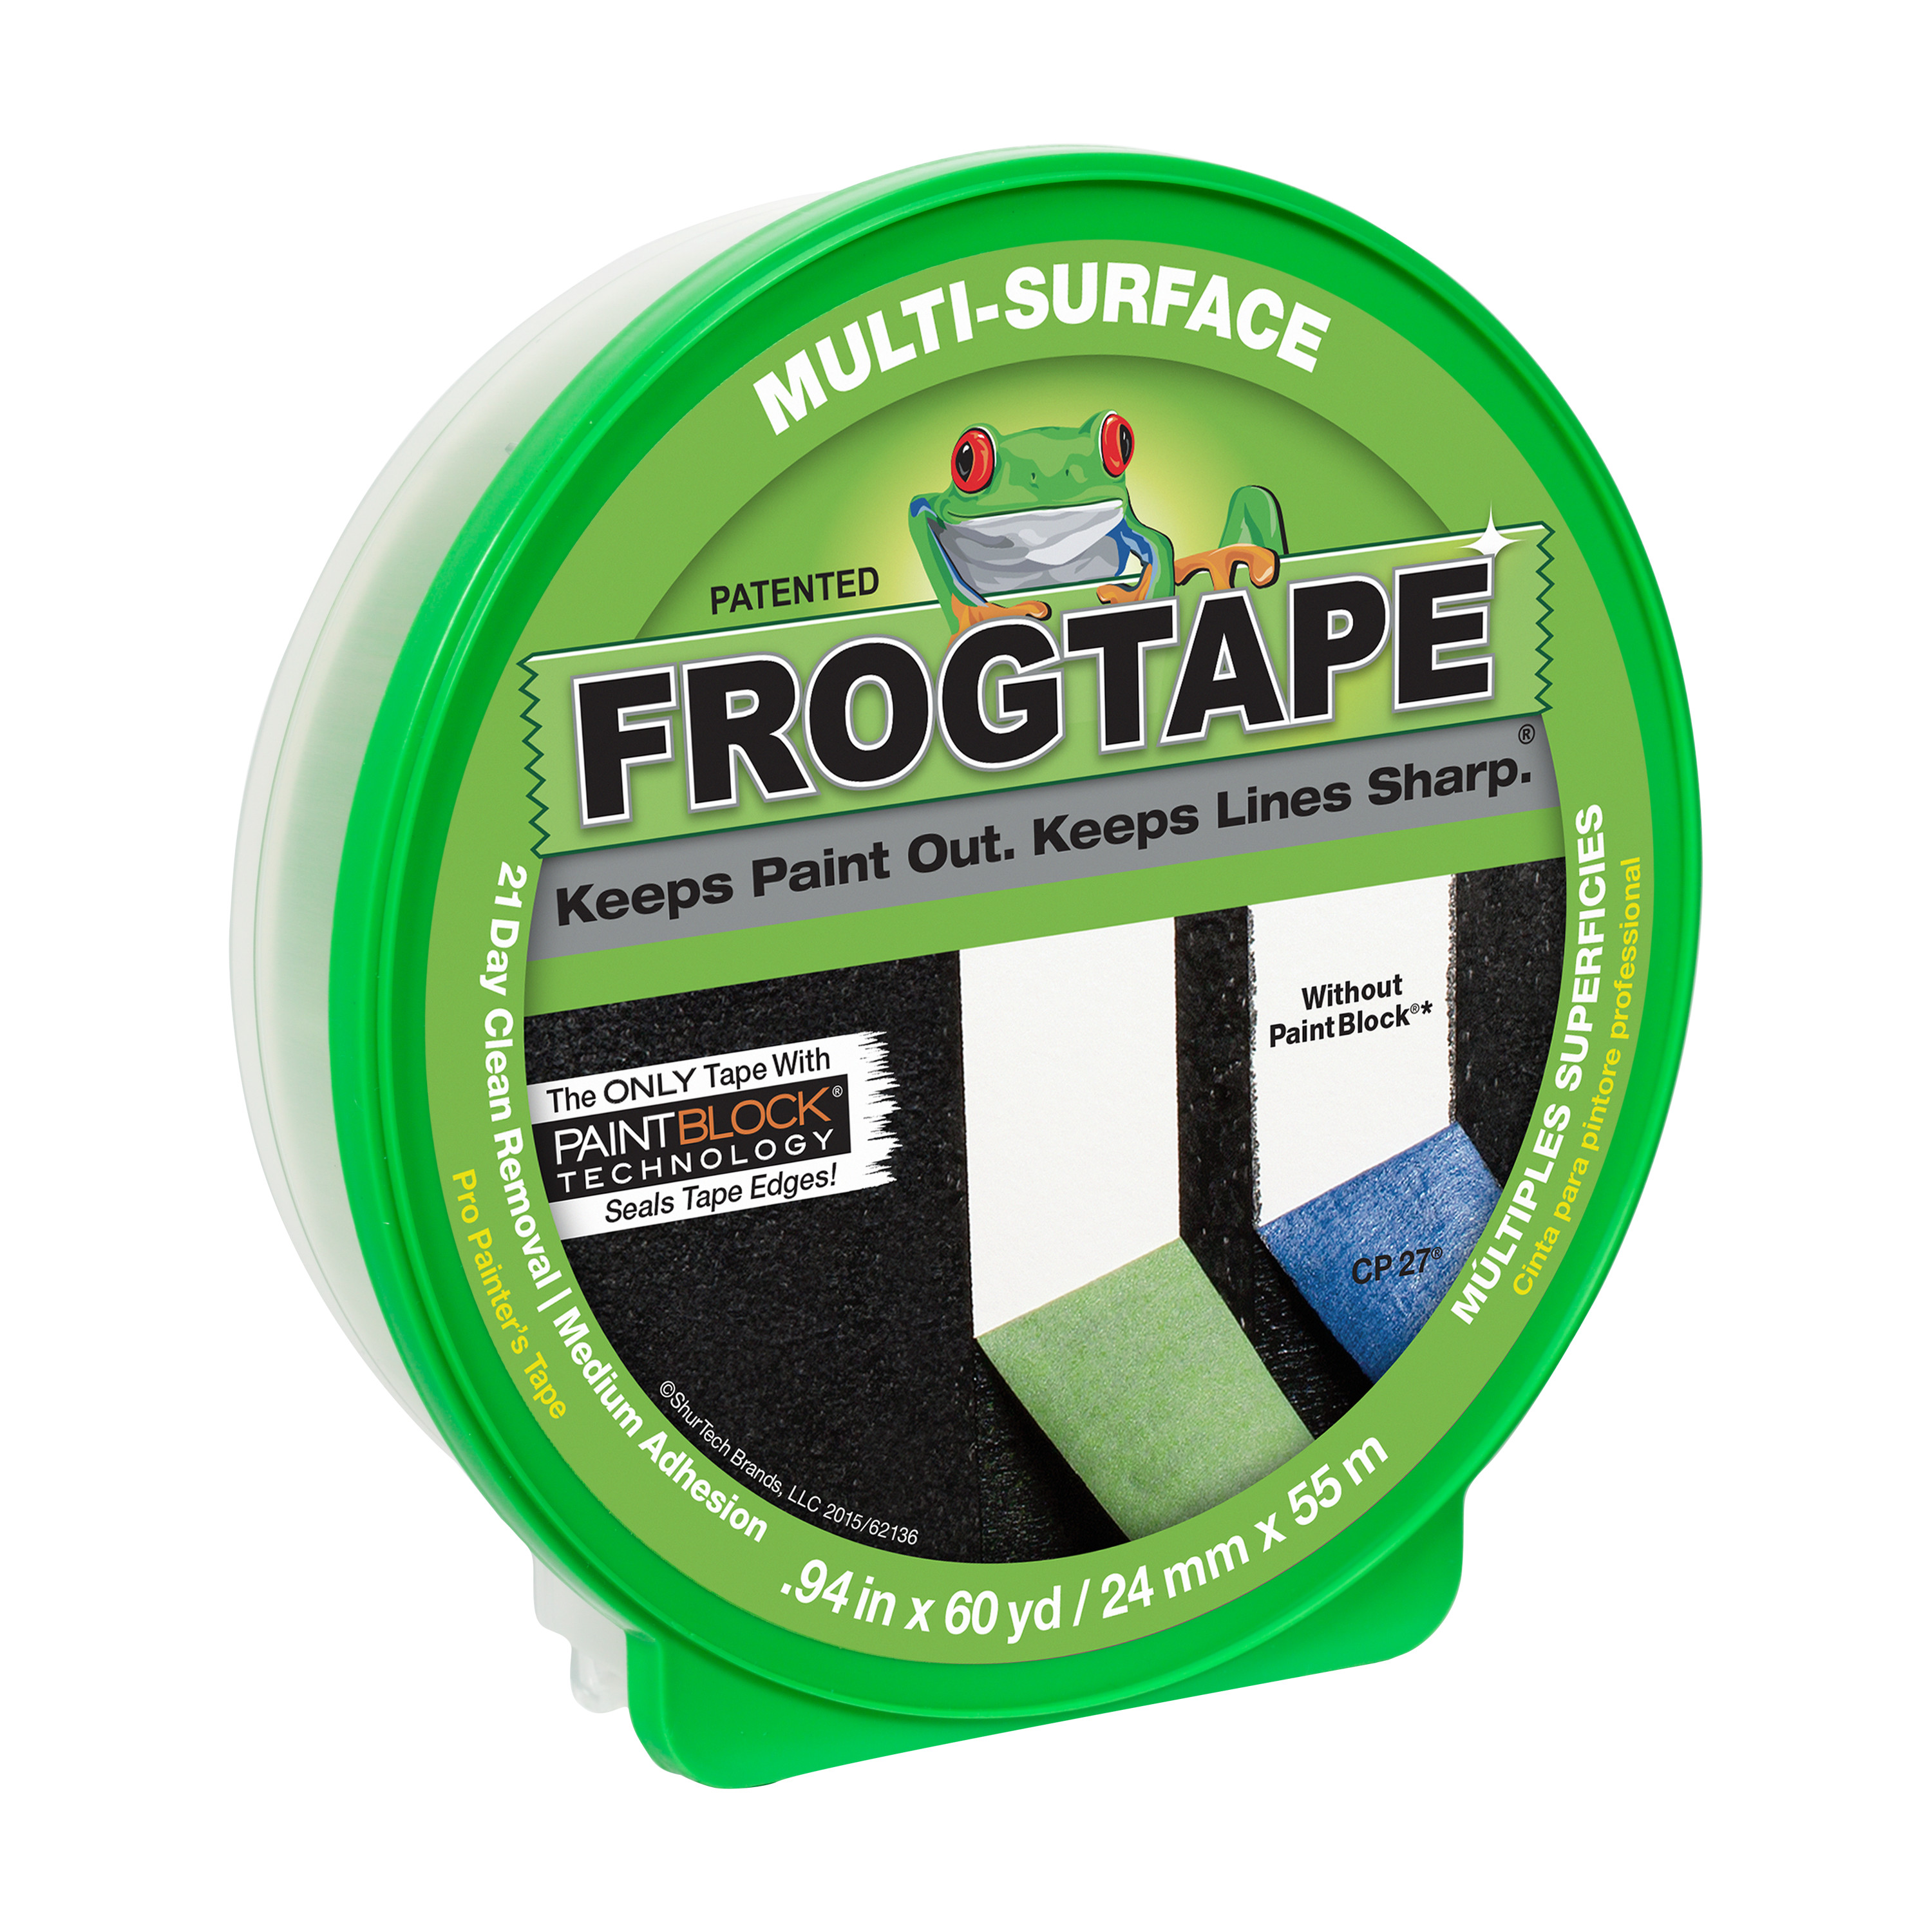 FrogTape 0.94 in. x 60 yd. Green Multi-Surface Painter's Tape - image 1 of 10